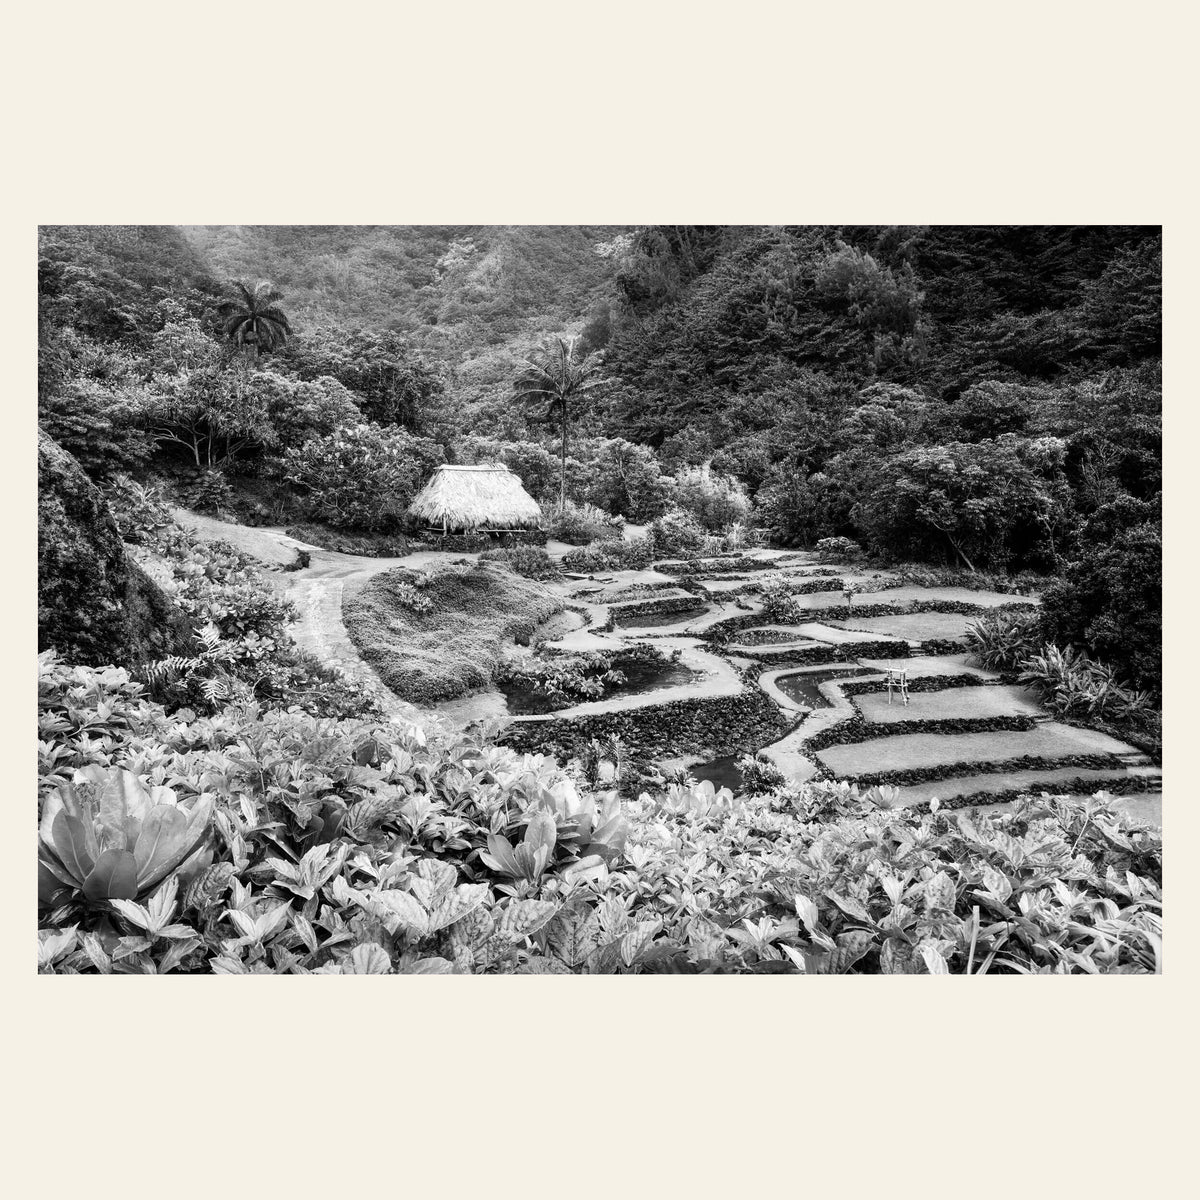 A black and white picture from Limahuli Garden on Kauai.